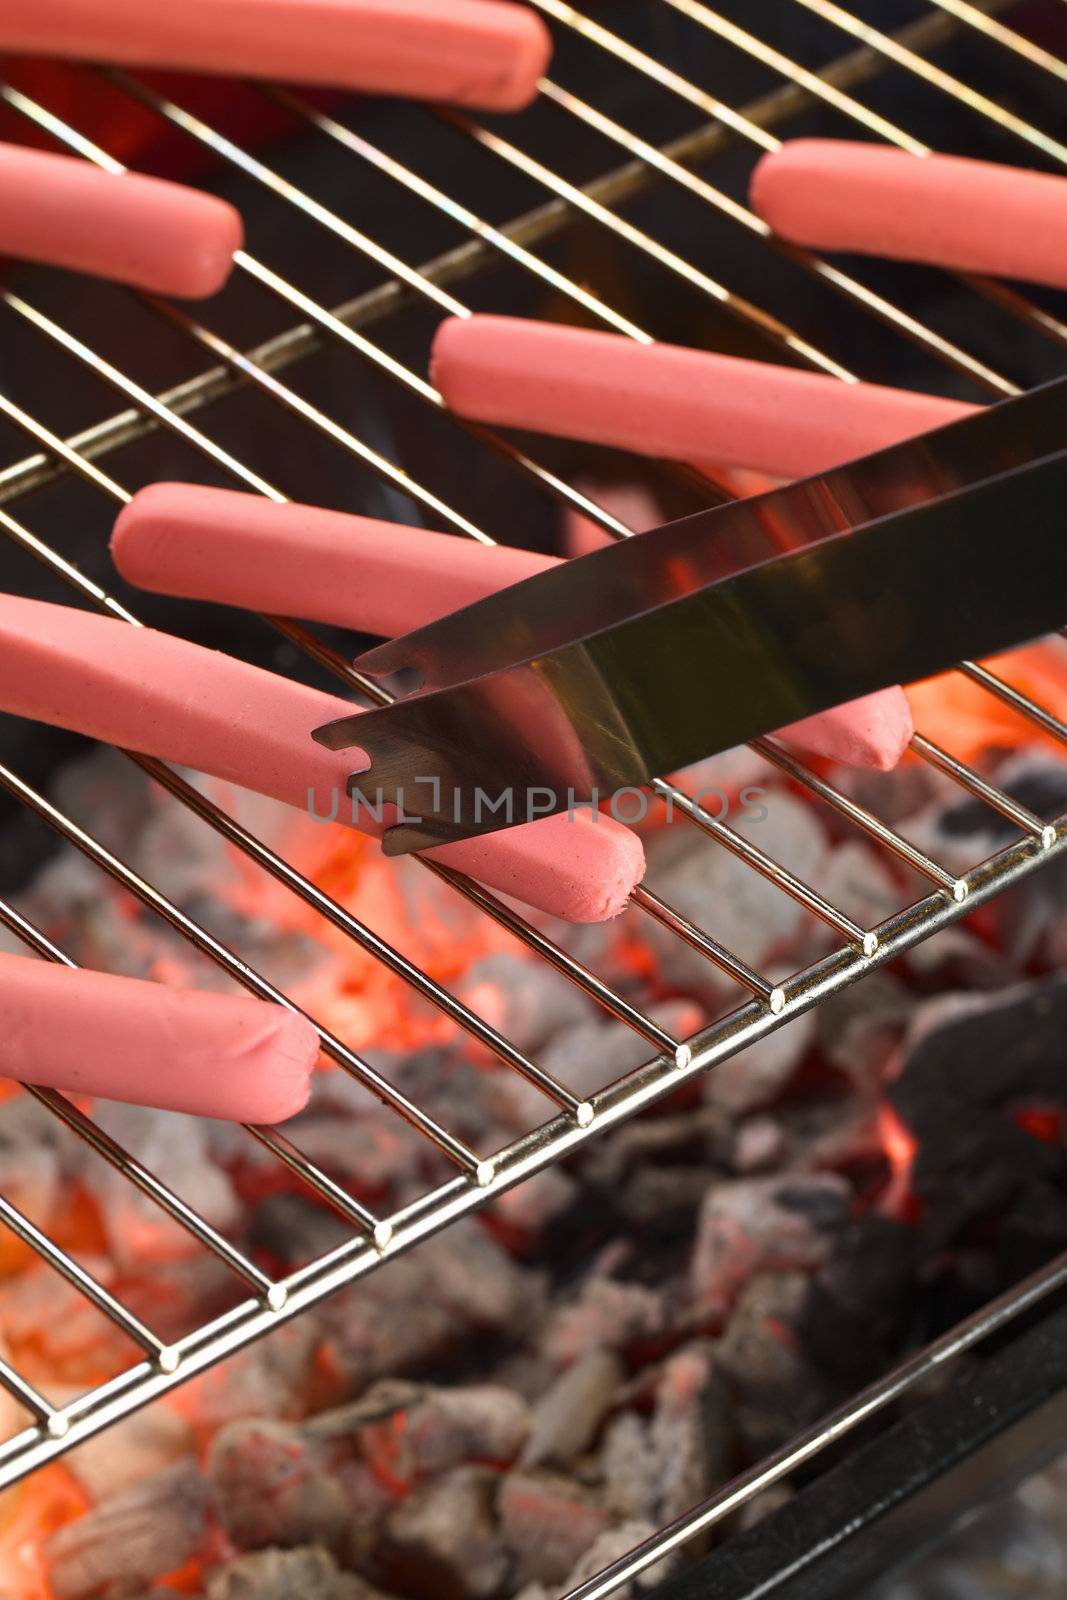 Sausages on barbecue with tongs with glowing charcoal below (Selective Focus, Focus on the end of the tongs and the lower end of the sausage they touch)